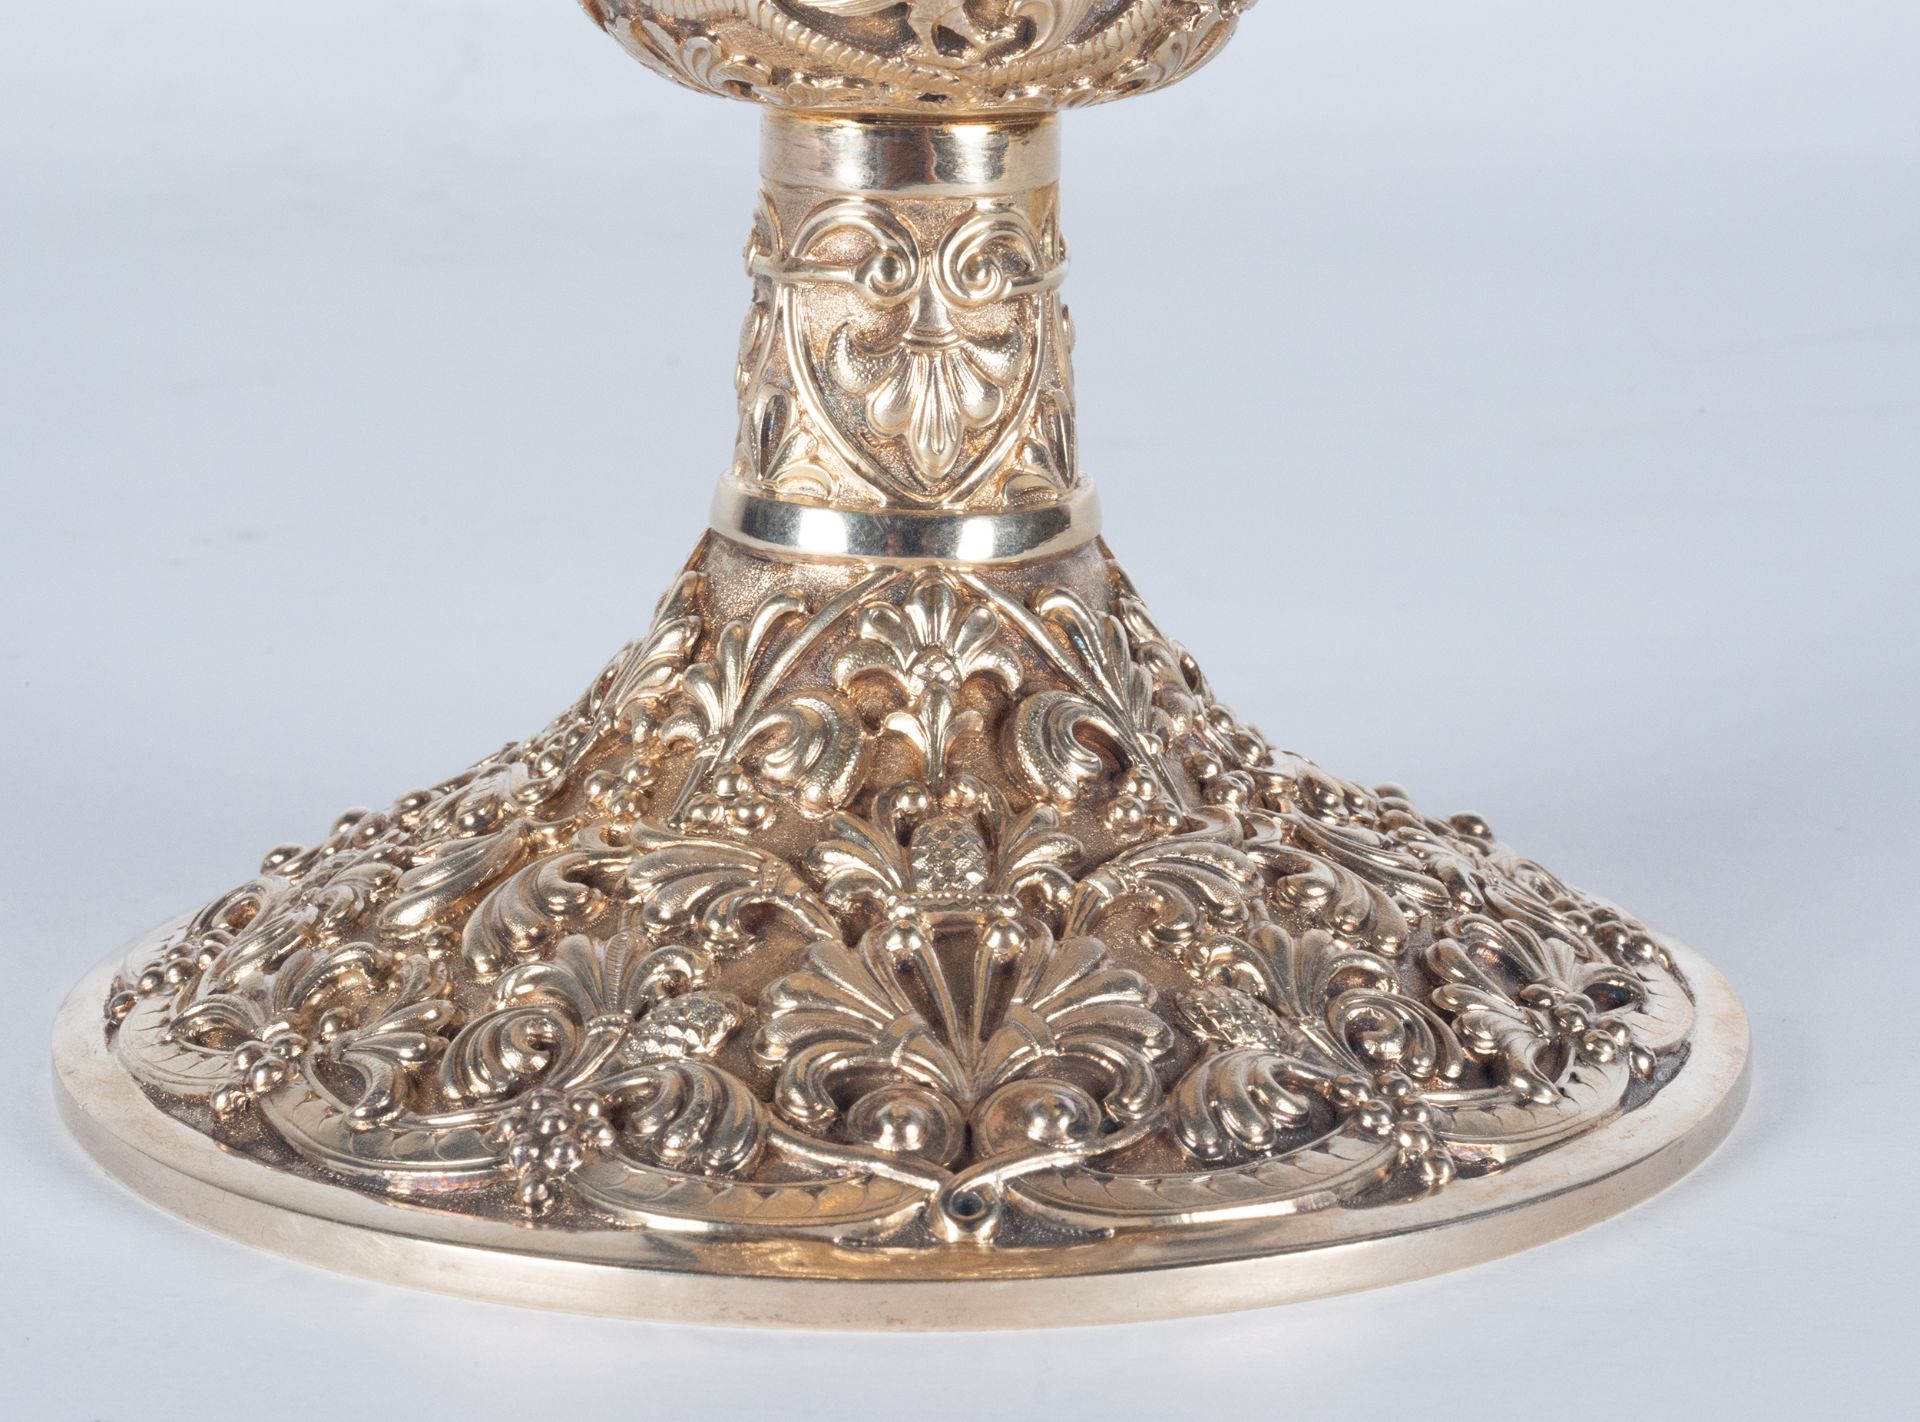 Important Liturgical Chalice in Golden 925 Sterling Silver with Salvilla, marks of Córdoba, peimra h - Image 5 of 6